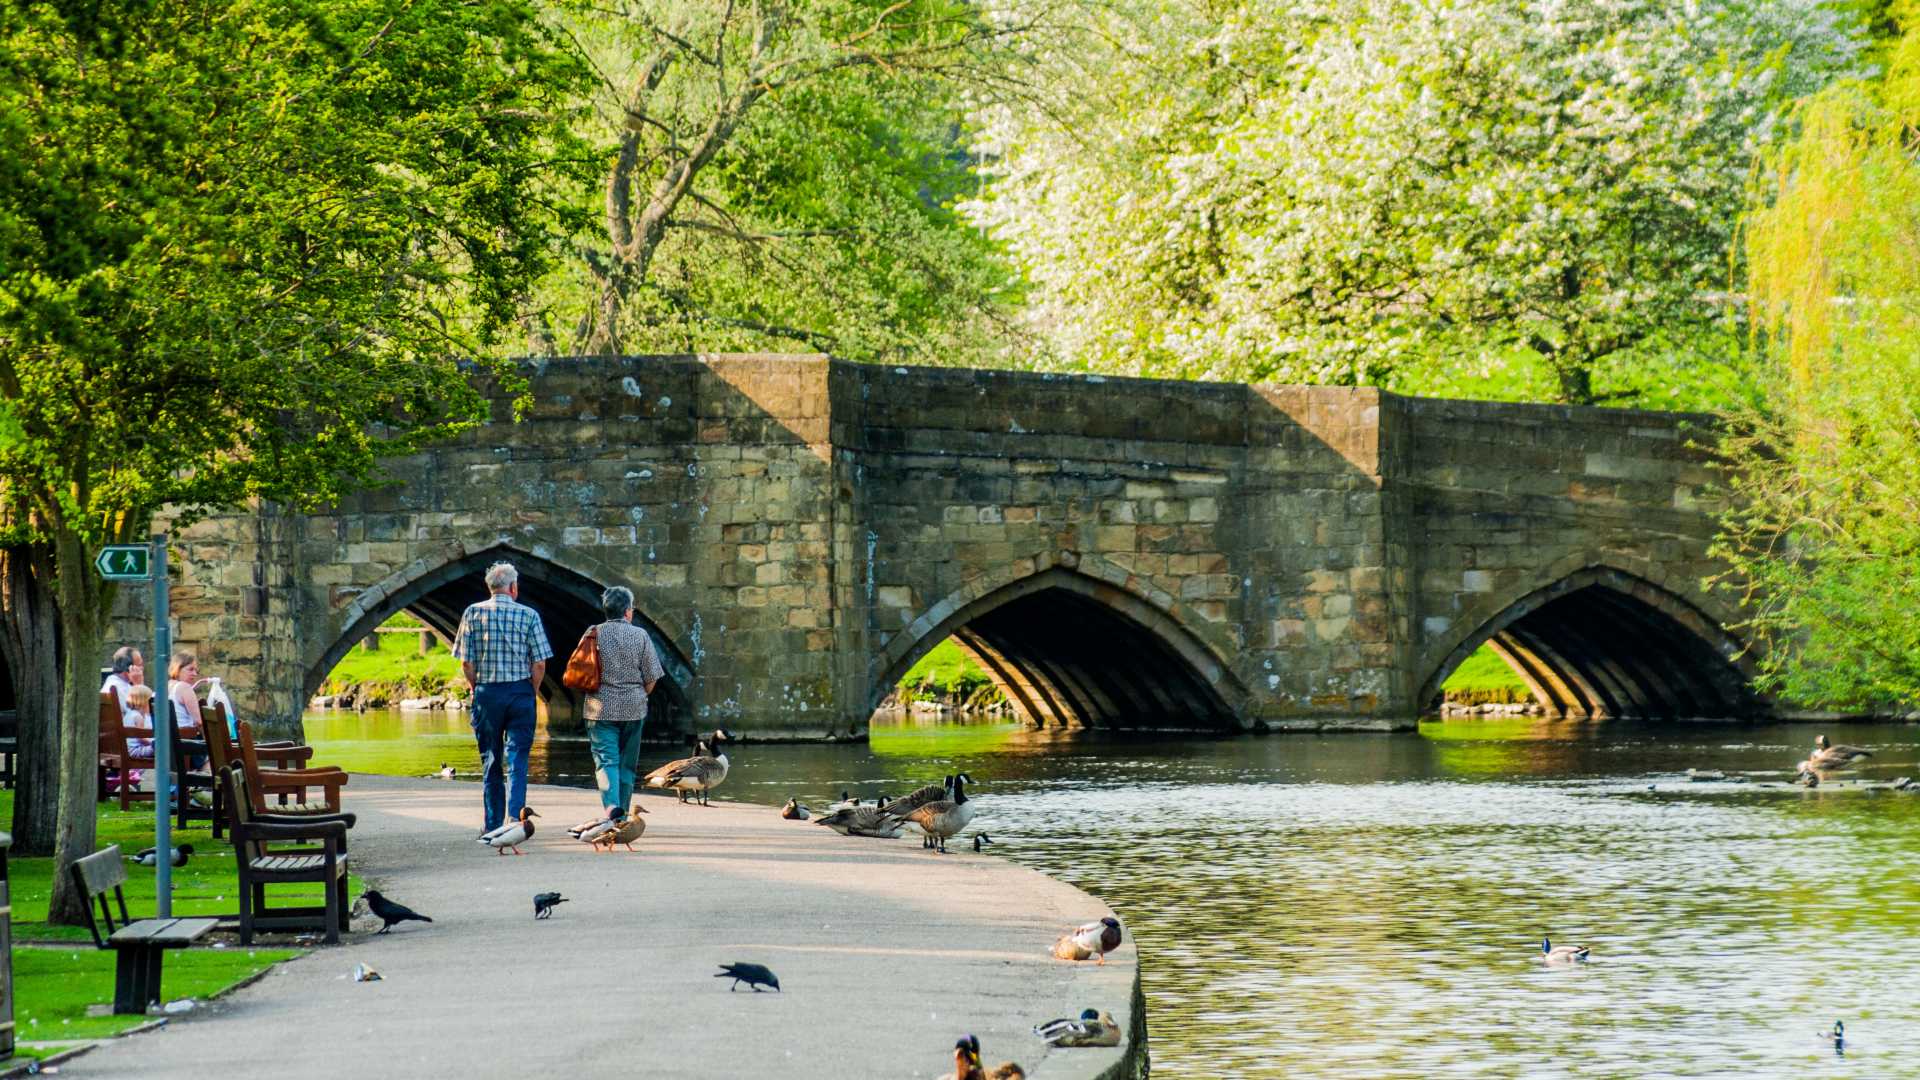 People strolling next to the calm river in Bakewell